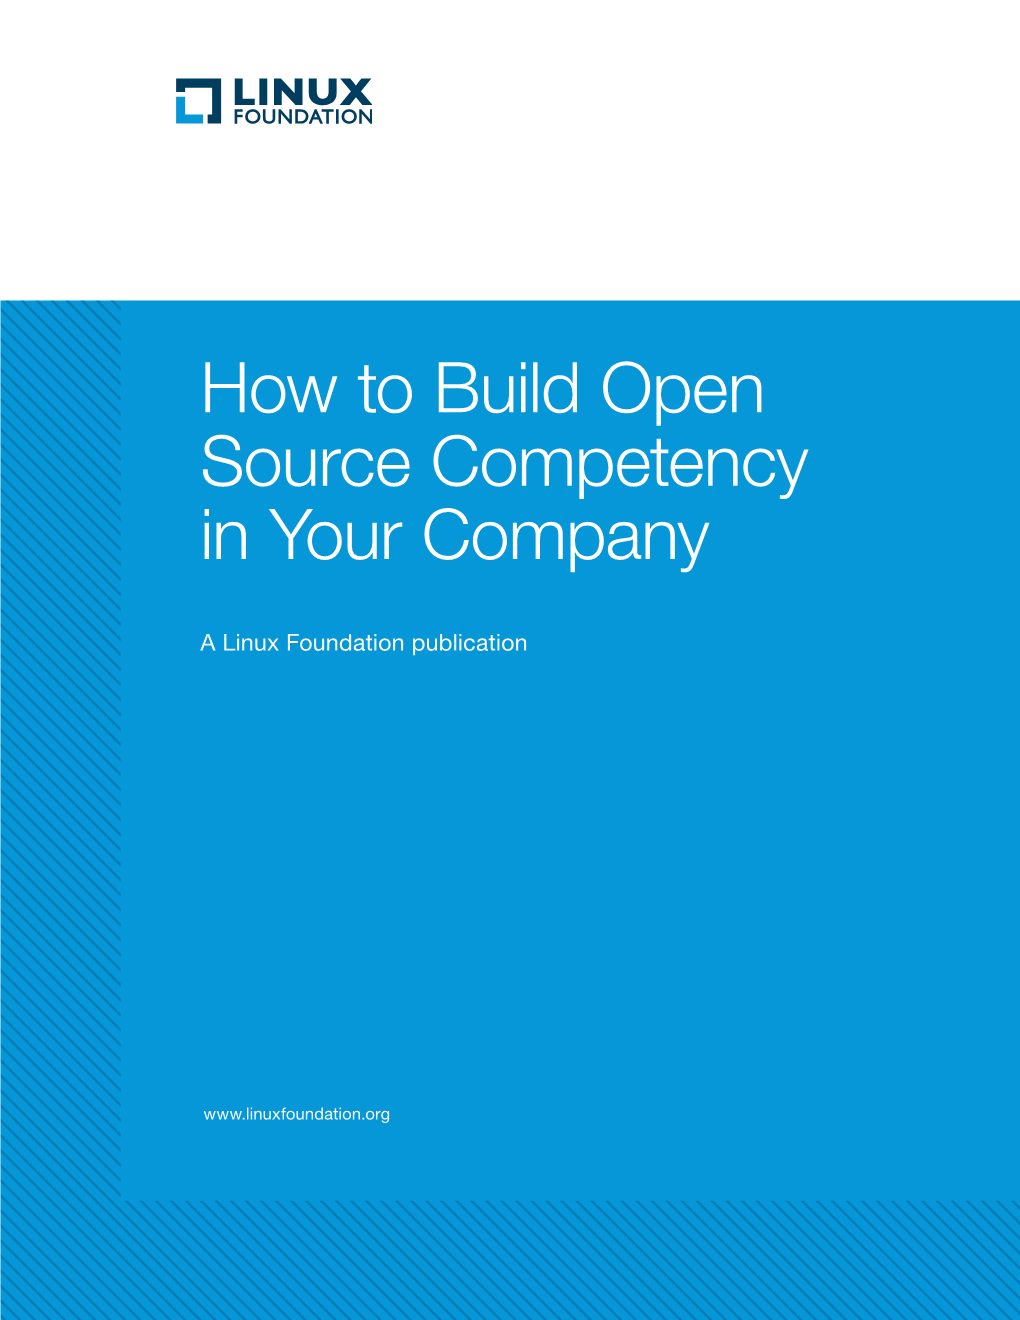 How to Build Open Source Competency in Your Company